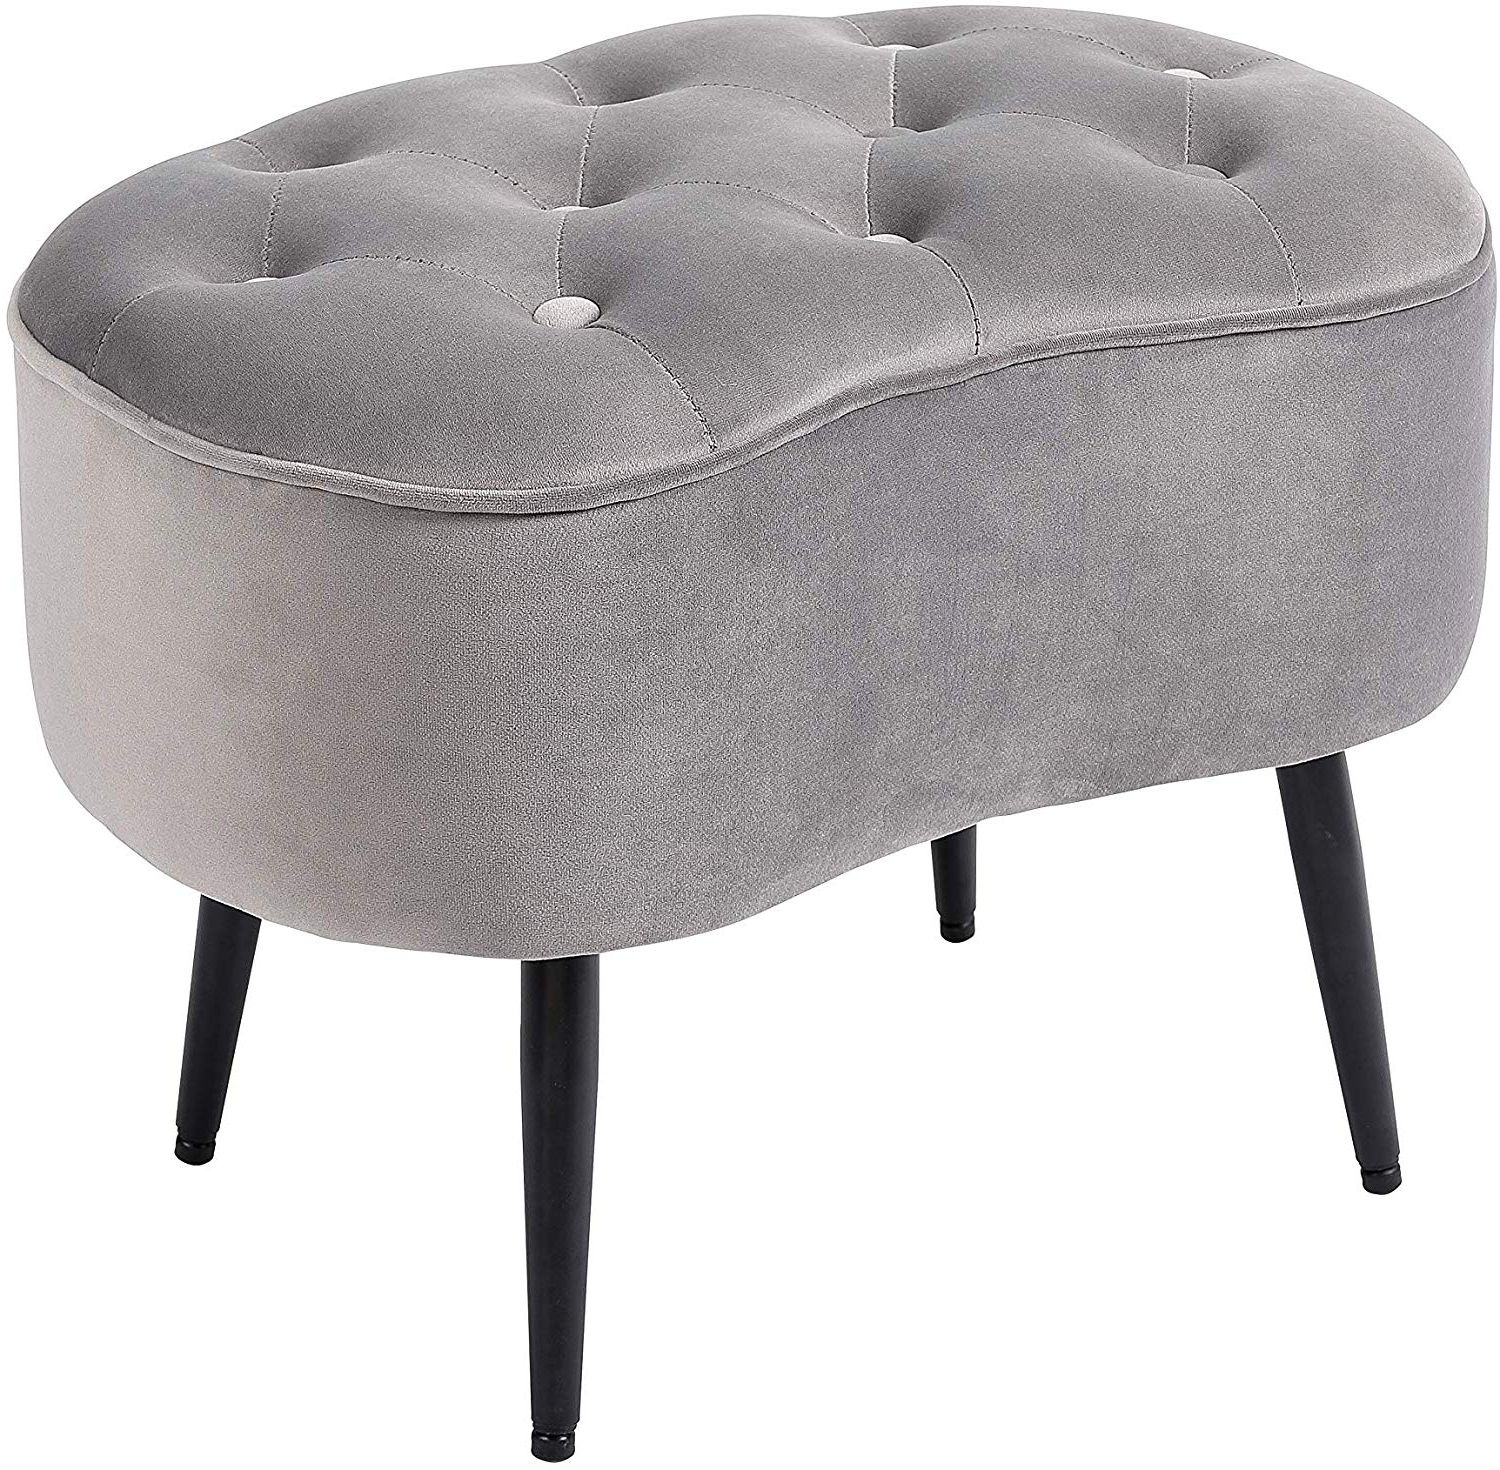 Birdrock Home Tufted Oblong Grey Ottoman – Velvet Foot Stool – Mid Intended For Favorite Ivory Button Tufted Vanity Stools (View 6 of 10)